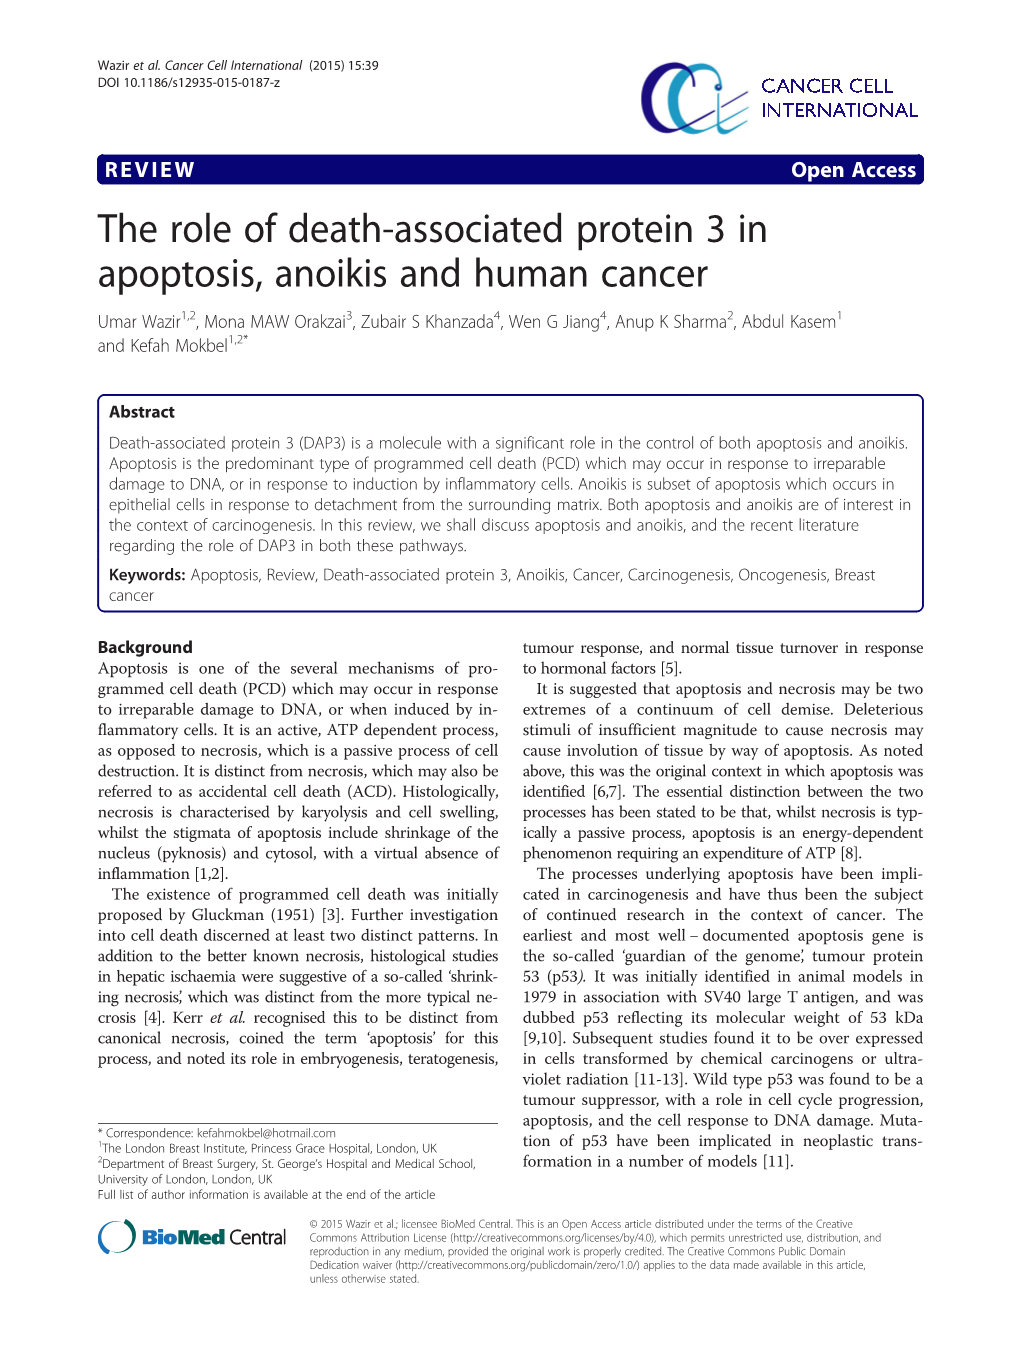 The Role of Death-Associated Protein 3 in Apoptosis, Anoikis and Human Cancer